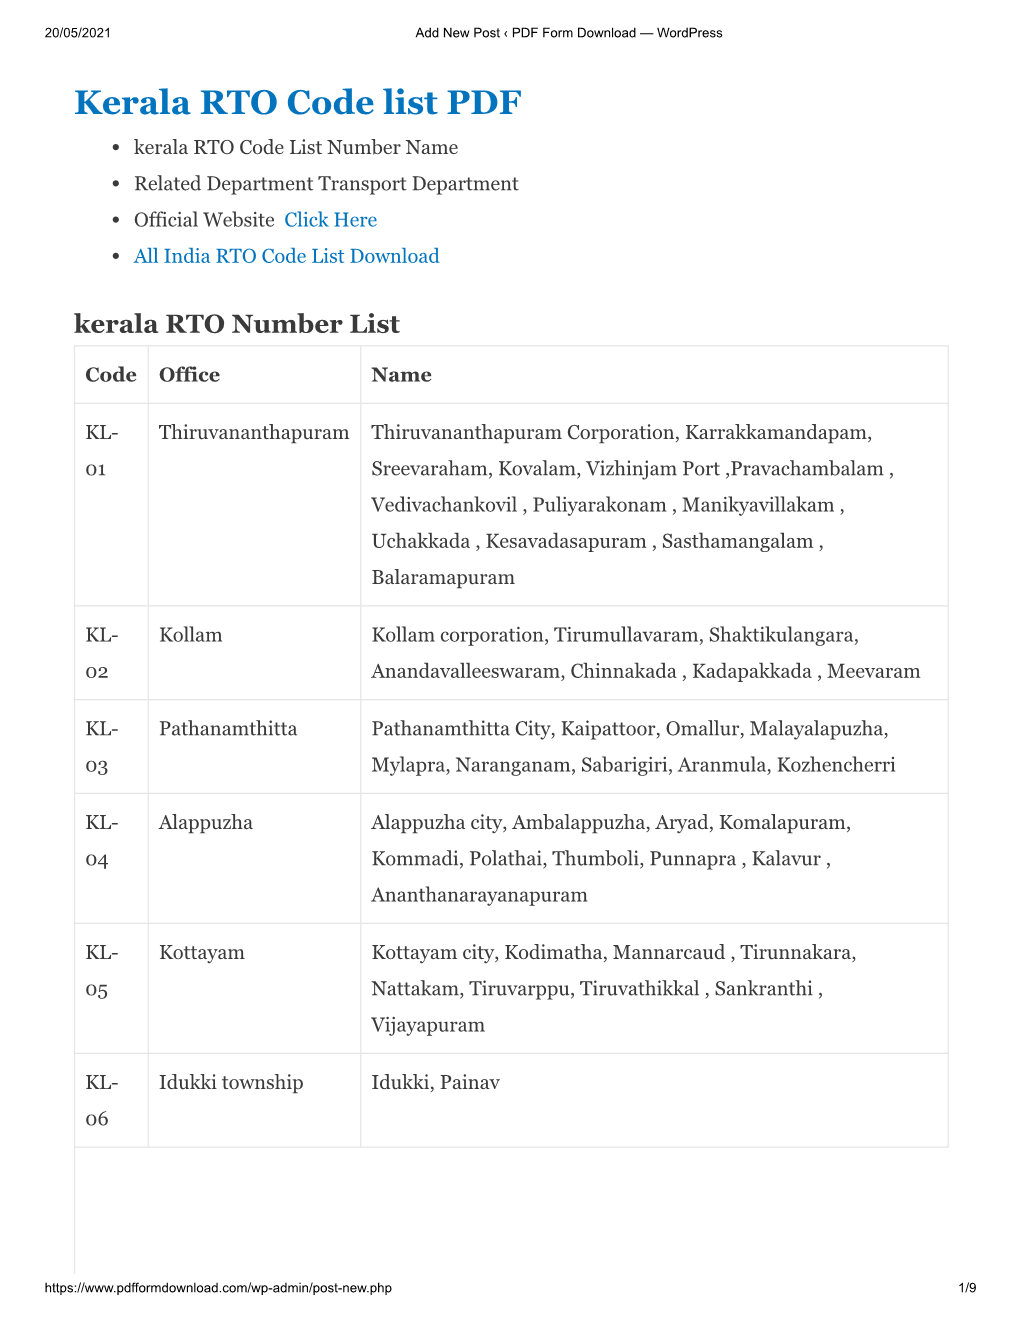 Kerala RTO Code List PDF Kerala RTO Code List Number Name Related Department Transport Department Official Website Click Here All India RTO Code List Download